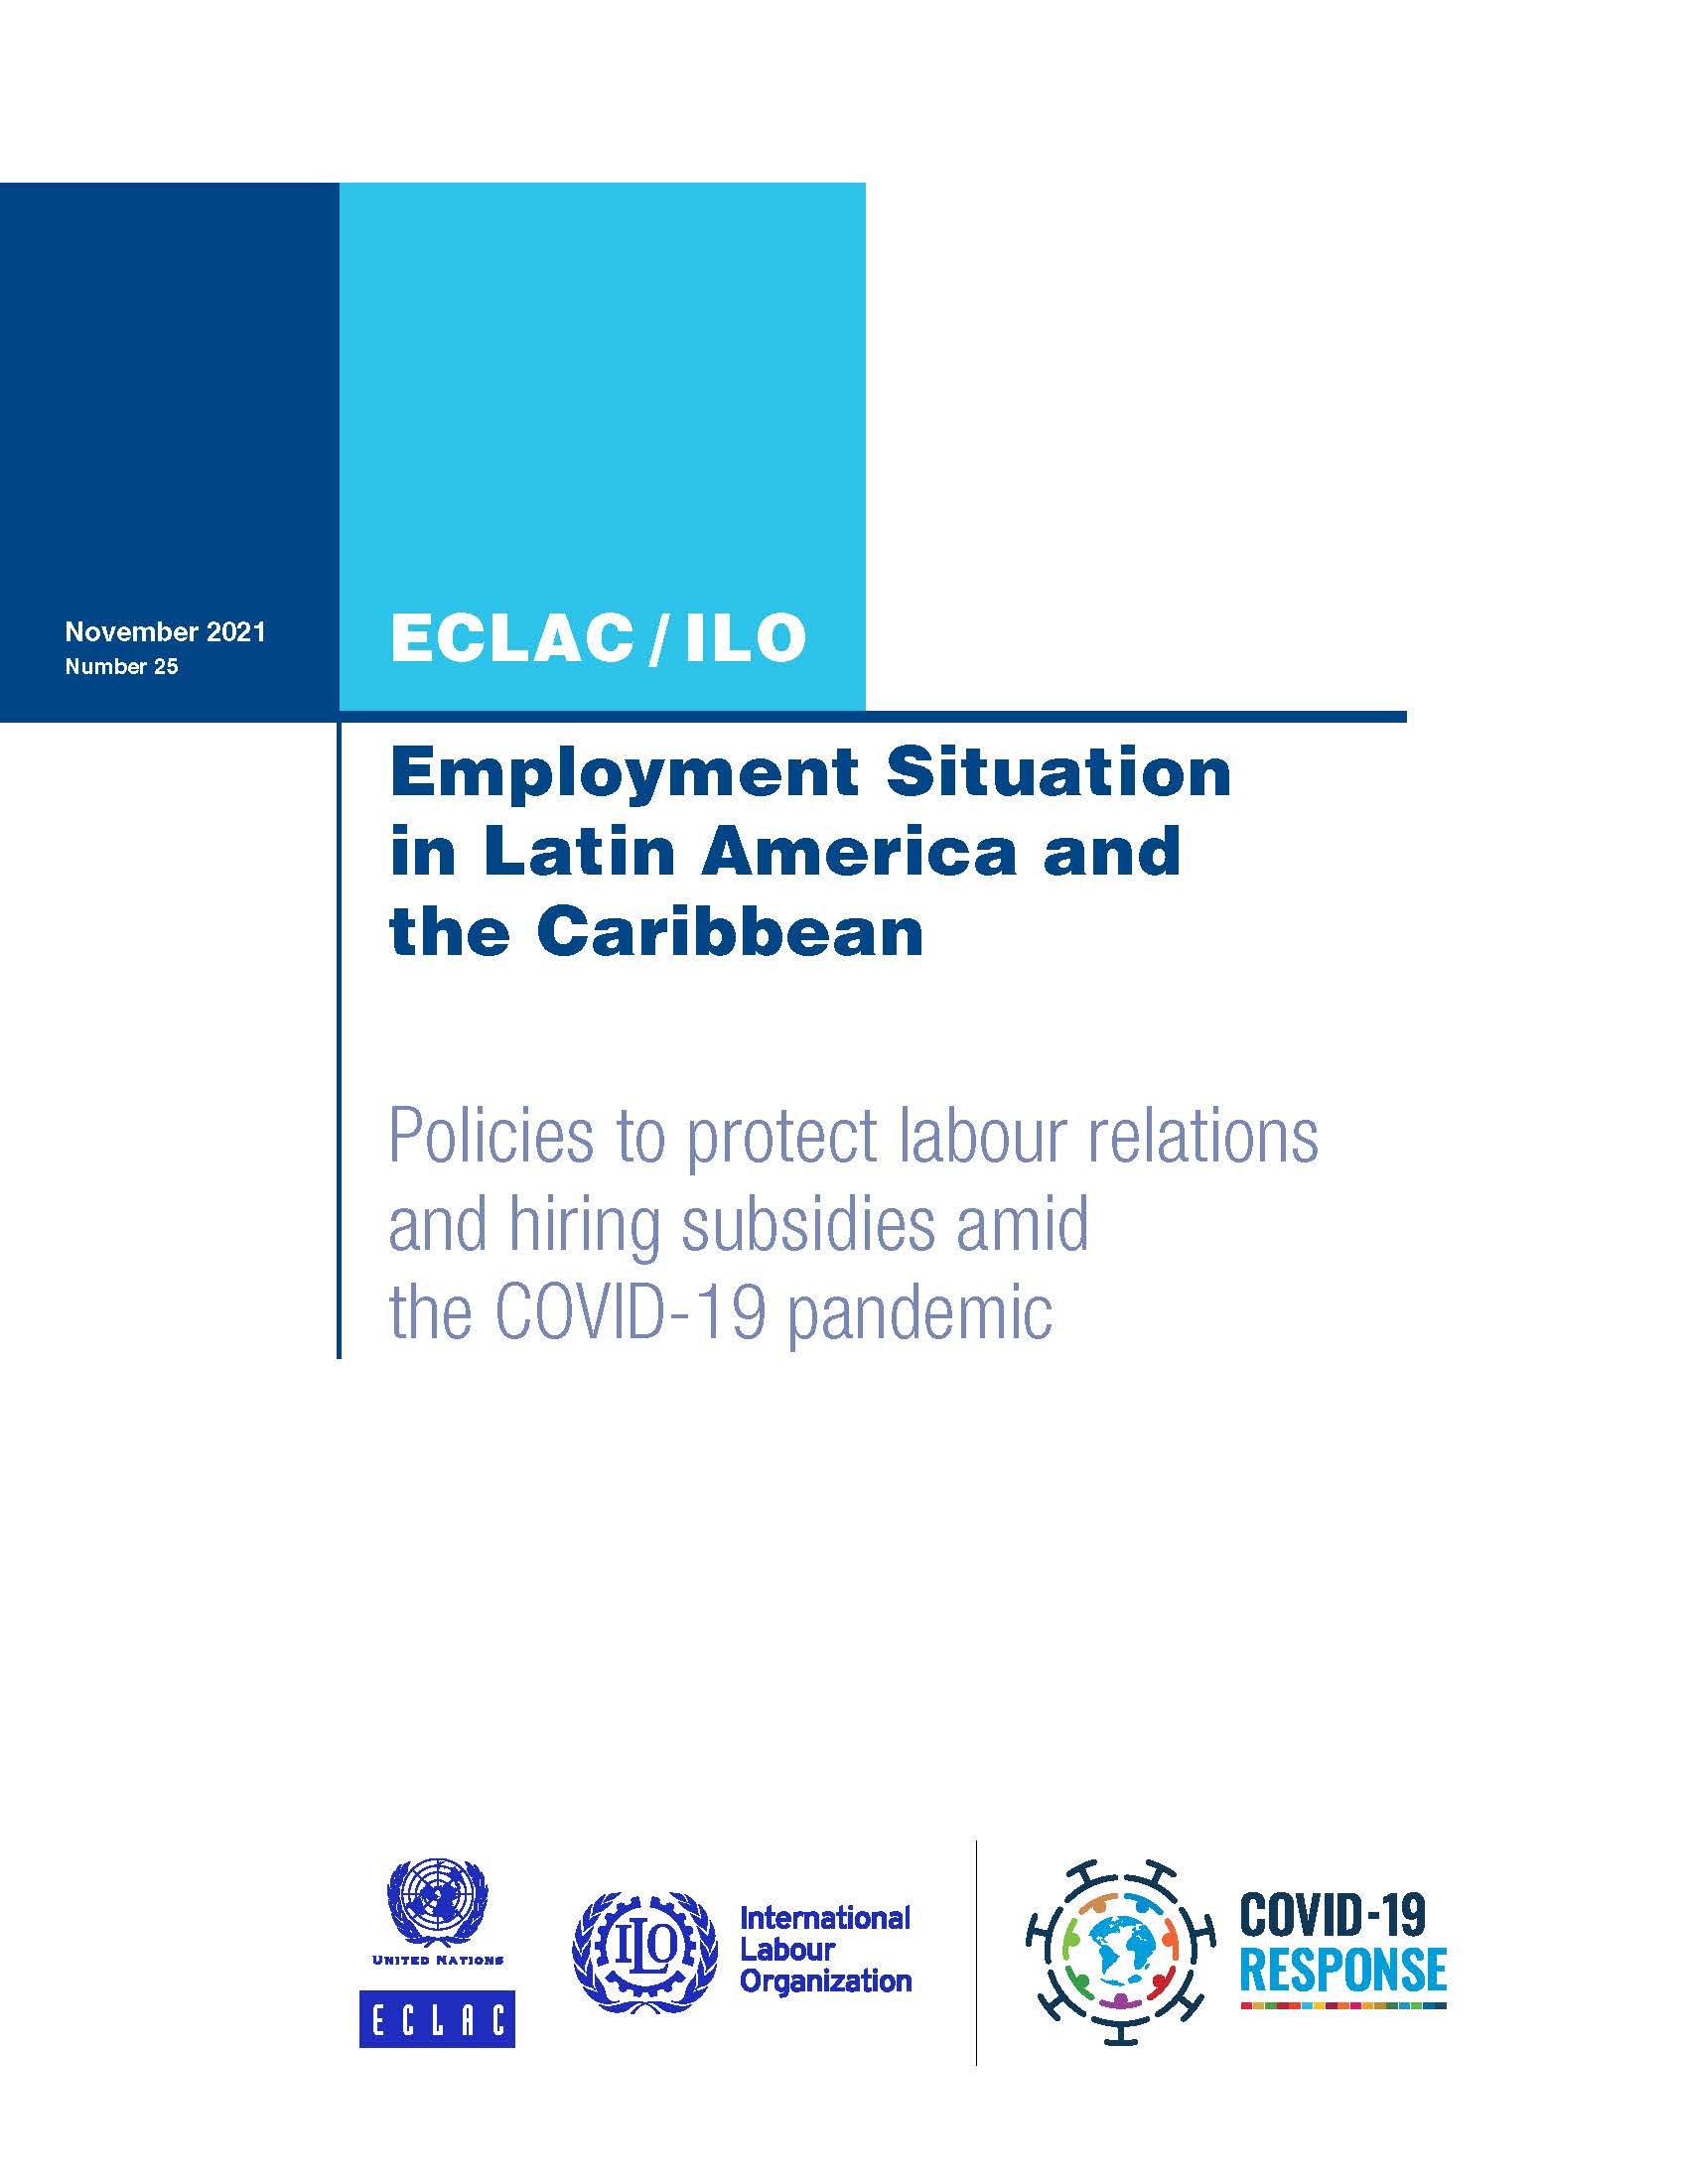 Employment Situation in Latin America and the Caribbean: Policies to protect labour relations and hiring subsidies amid the COVID-19 pandemic